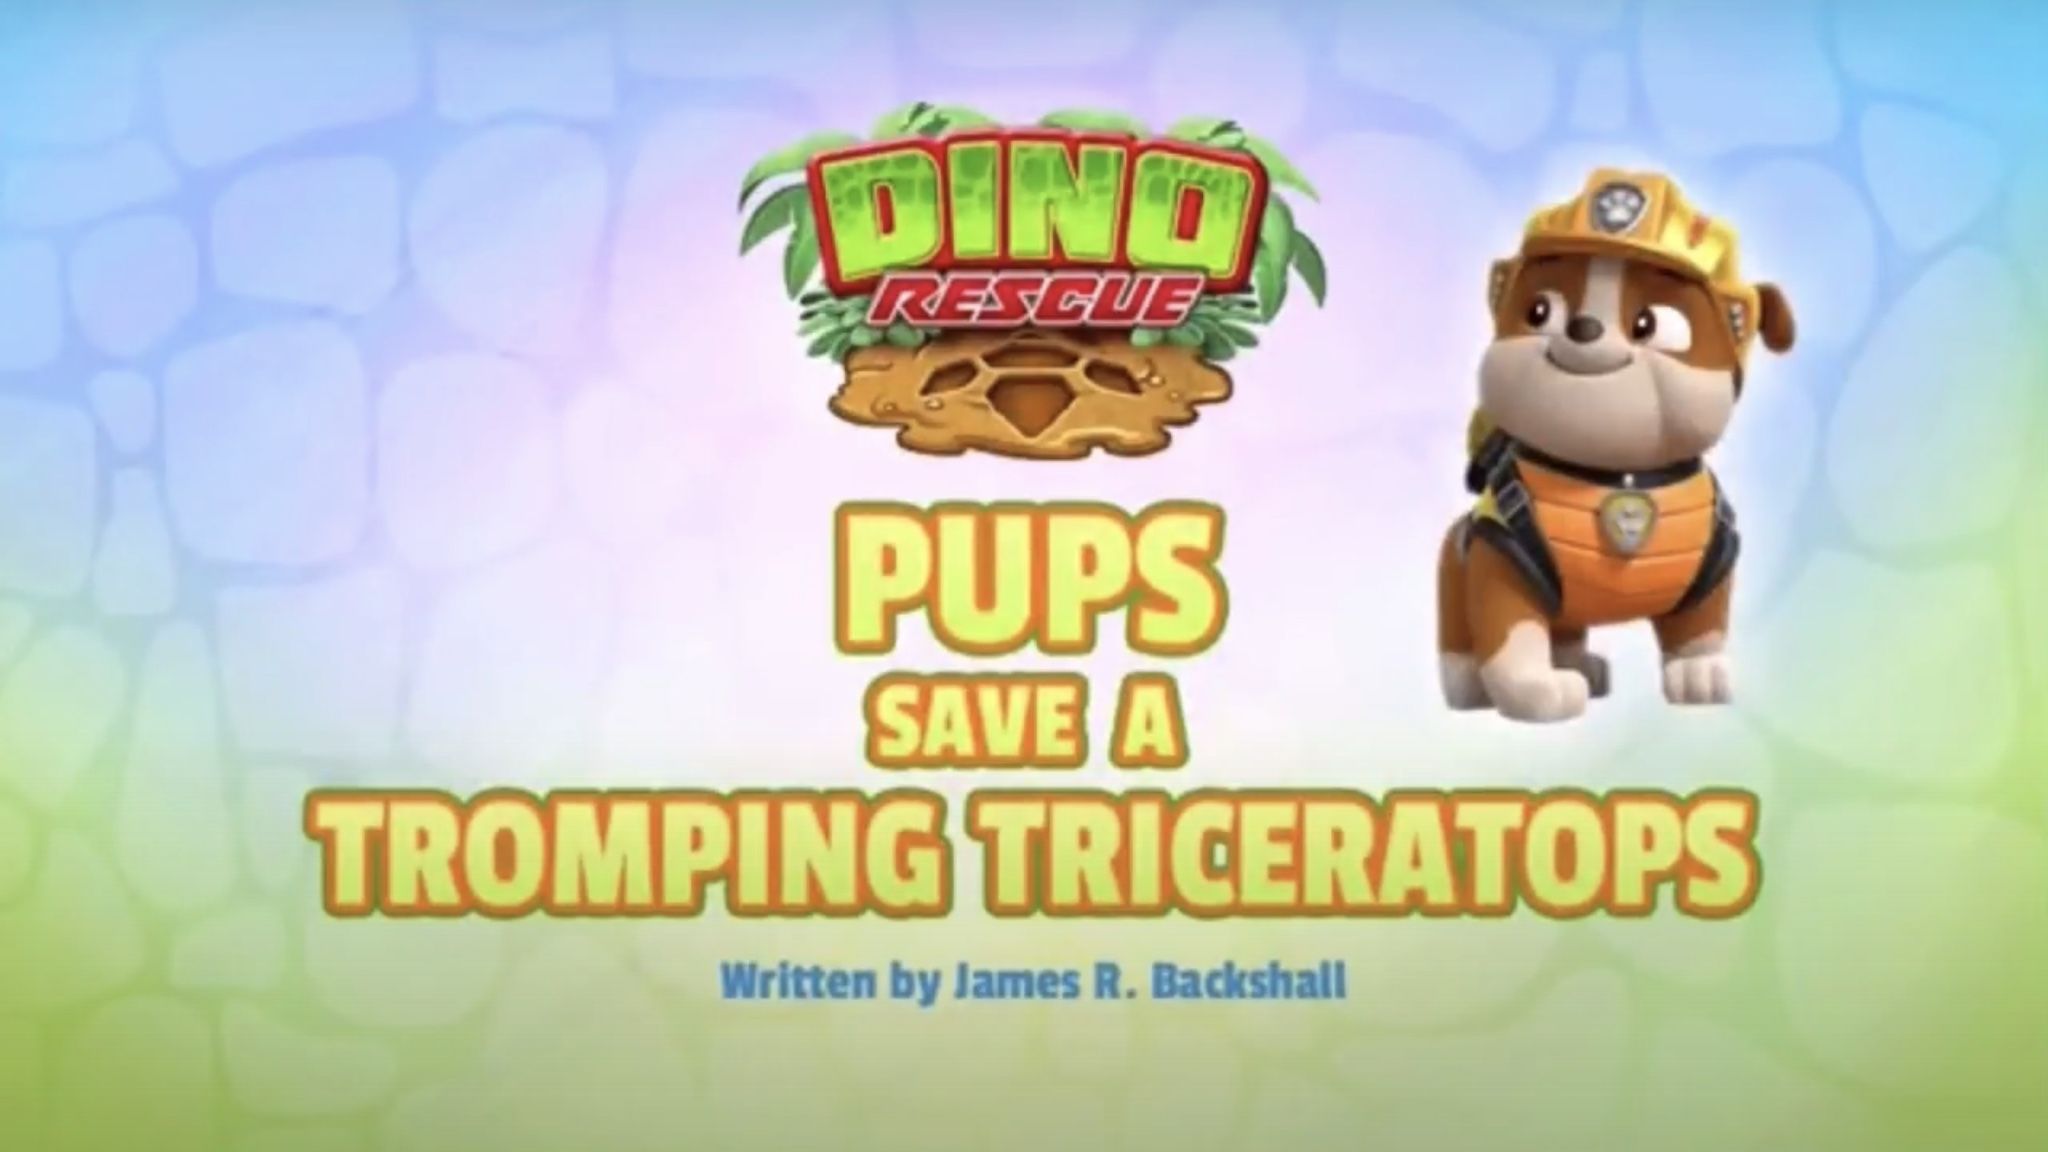 PAW Patrol Original 5s: Dino Rescue: Pups Save a Tromping Triceratops